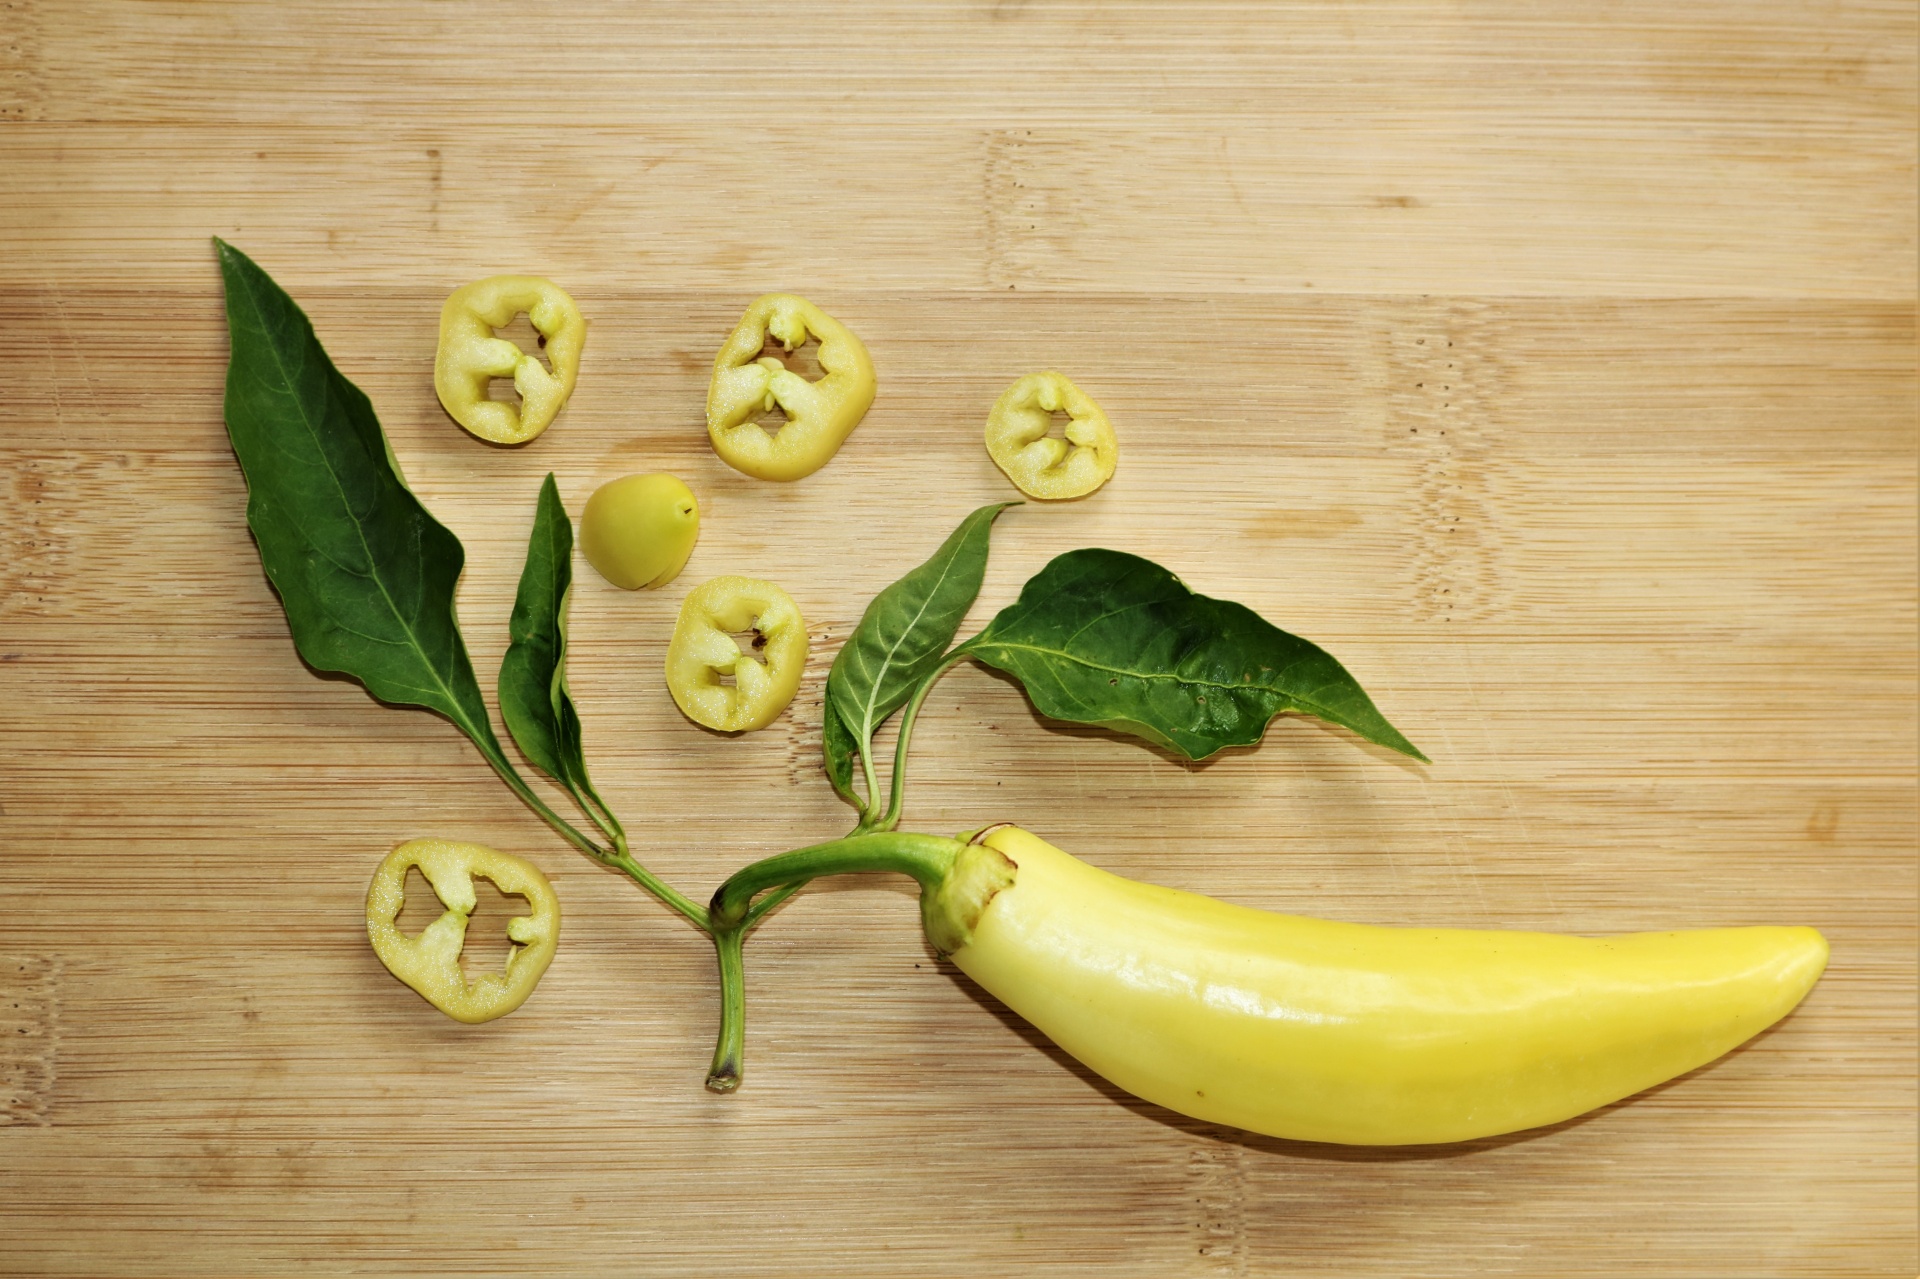 Banana Pepper And Slices On Wood